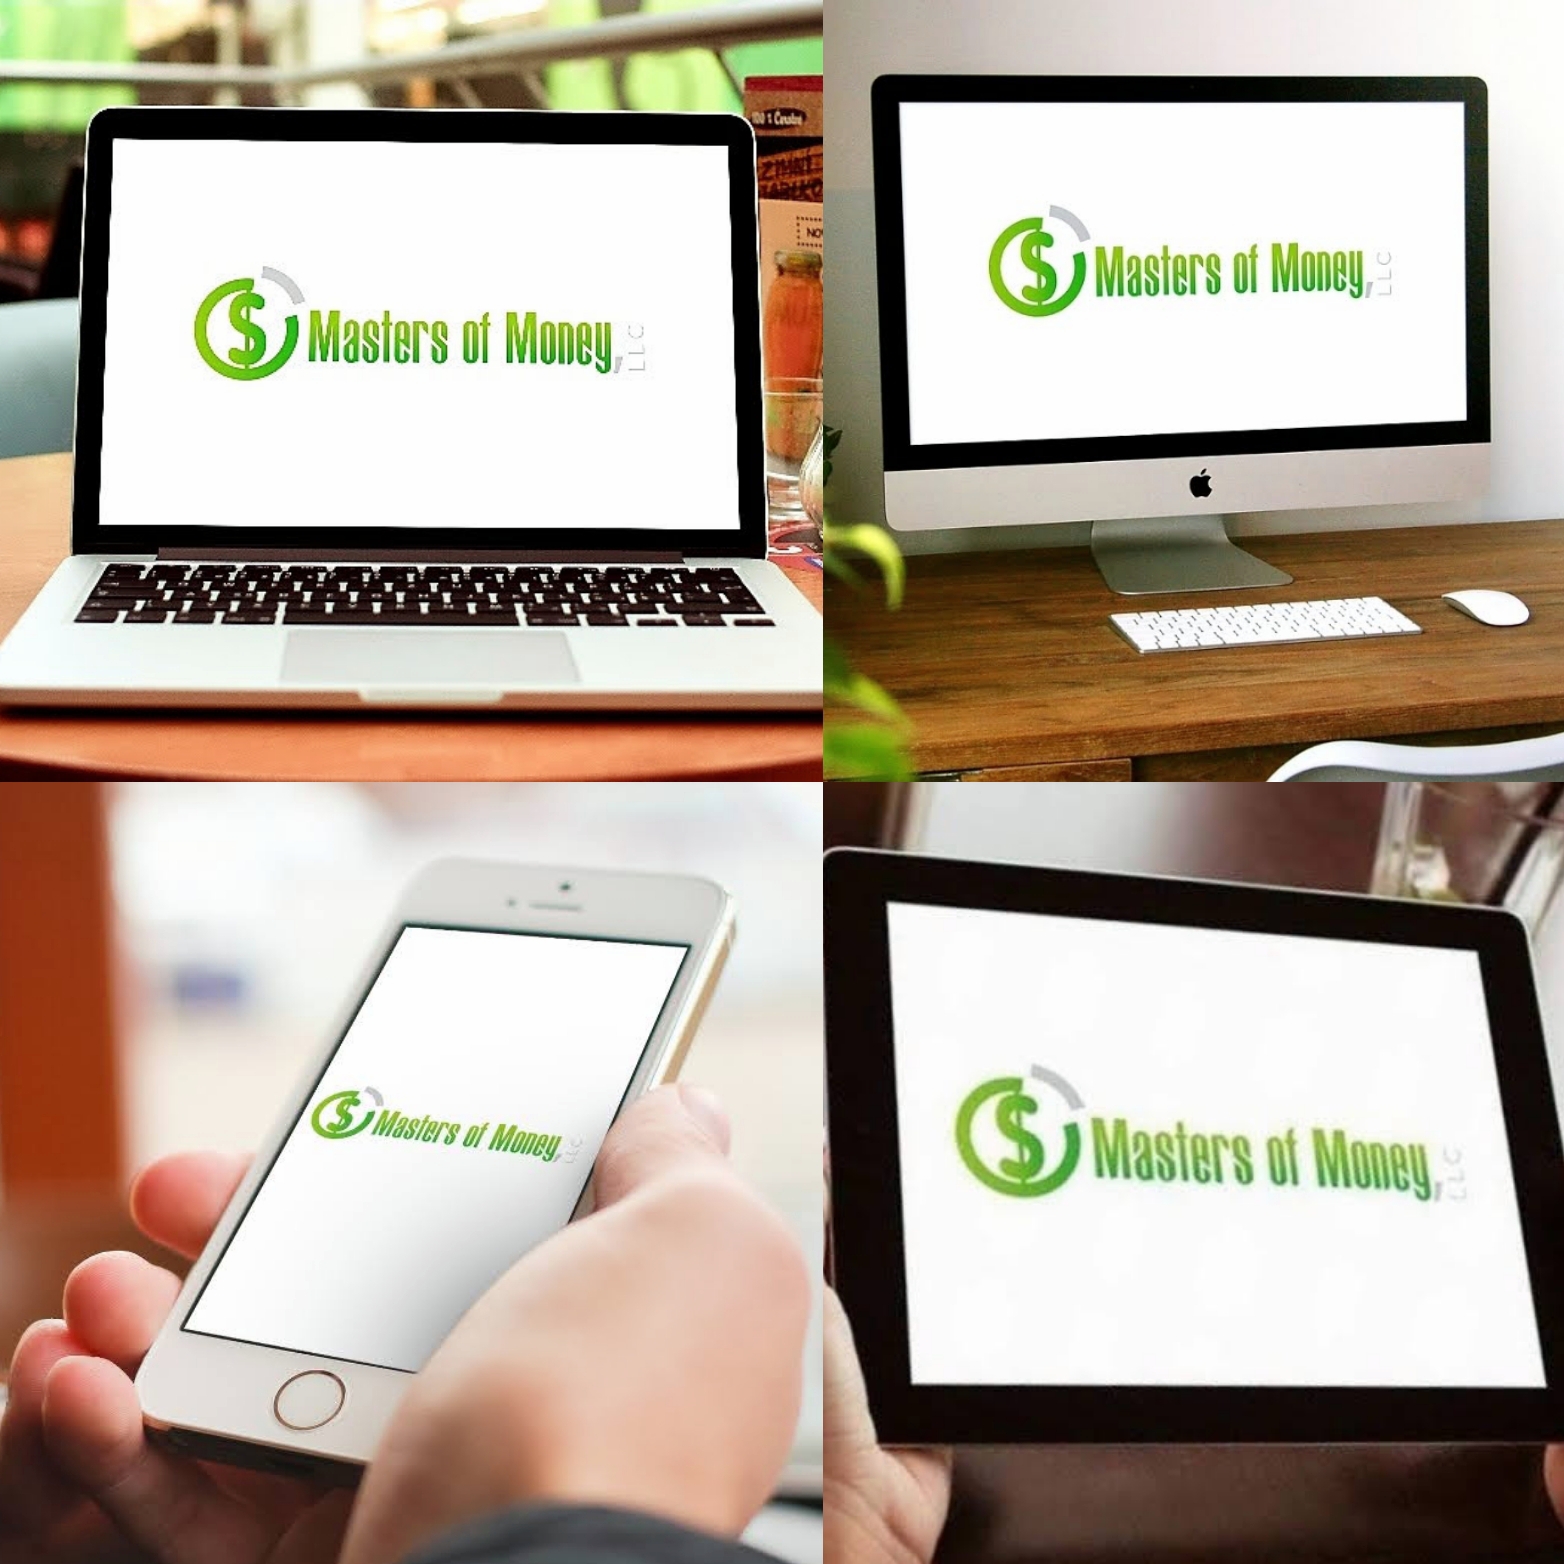 Masters of Money LLC Logo Screensaver on Electronic Devices Collage